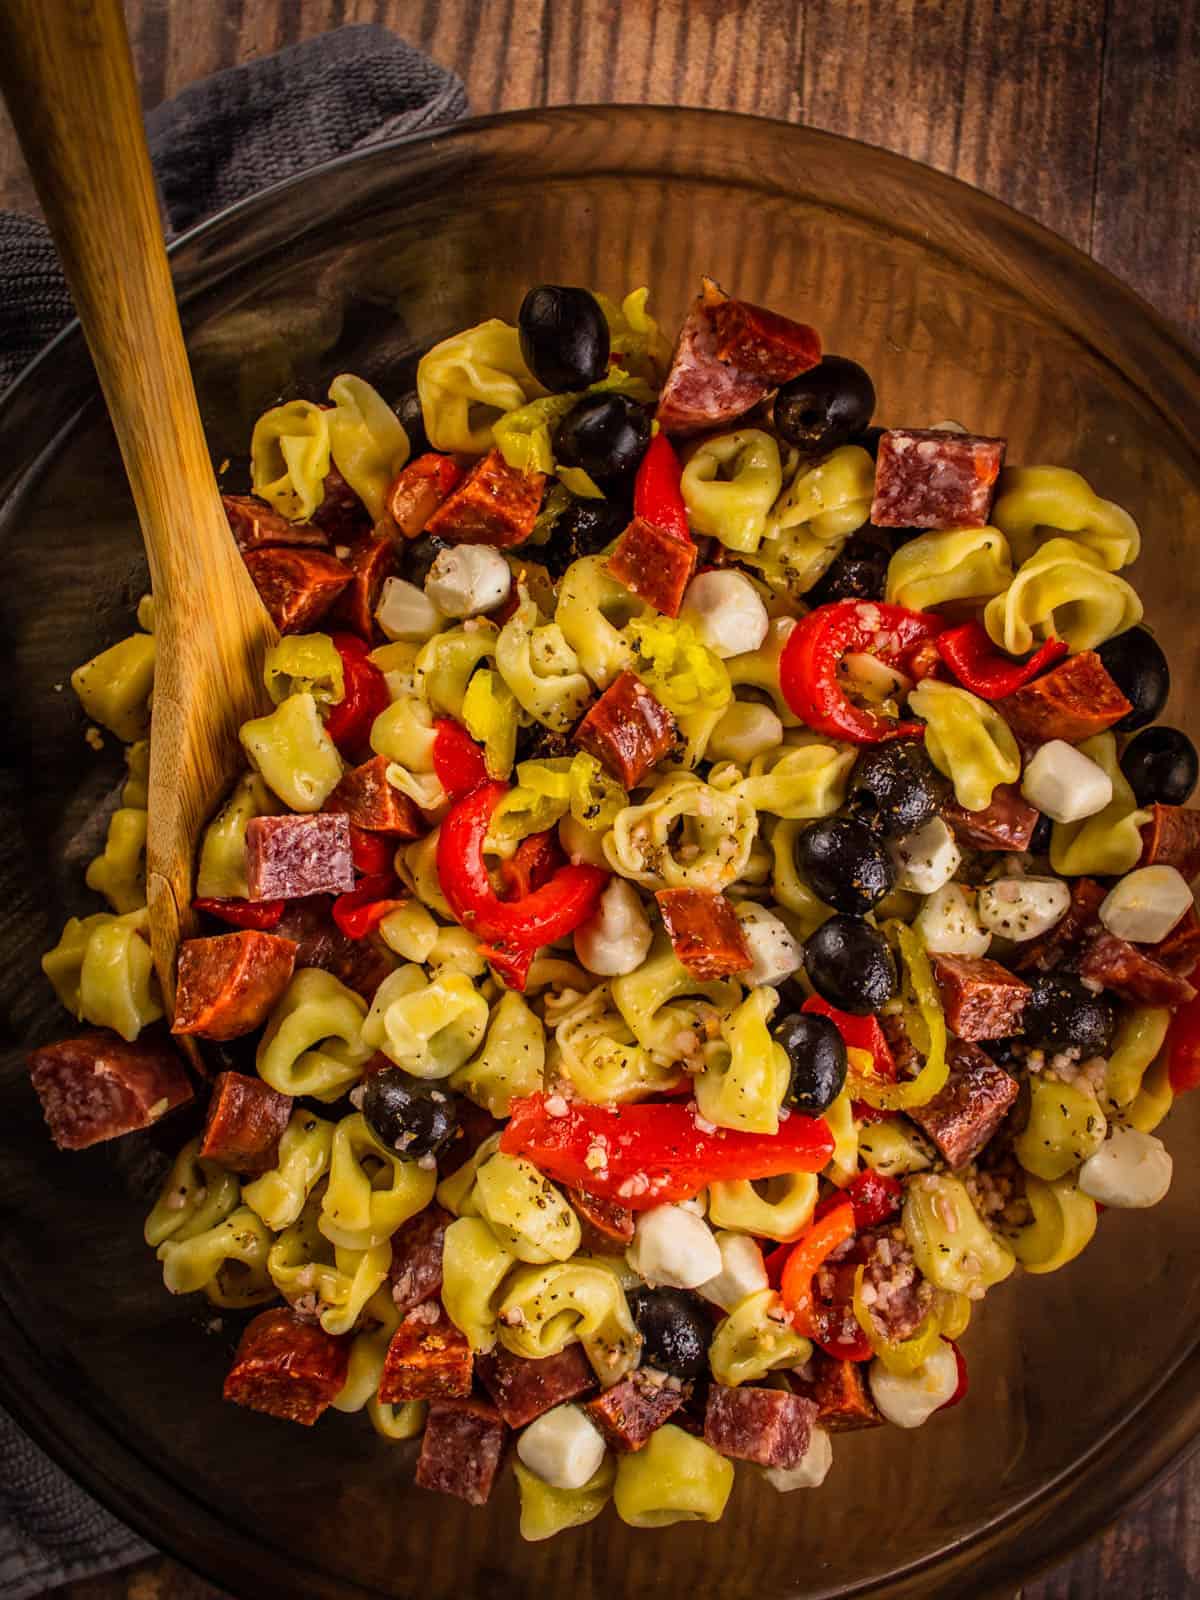 antipasto salad with tortellini, meat, cheese and peppers in a bowl with wooden spoon.